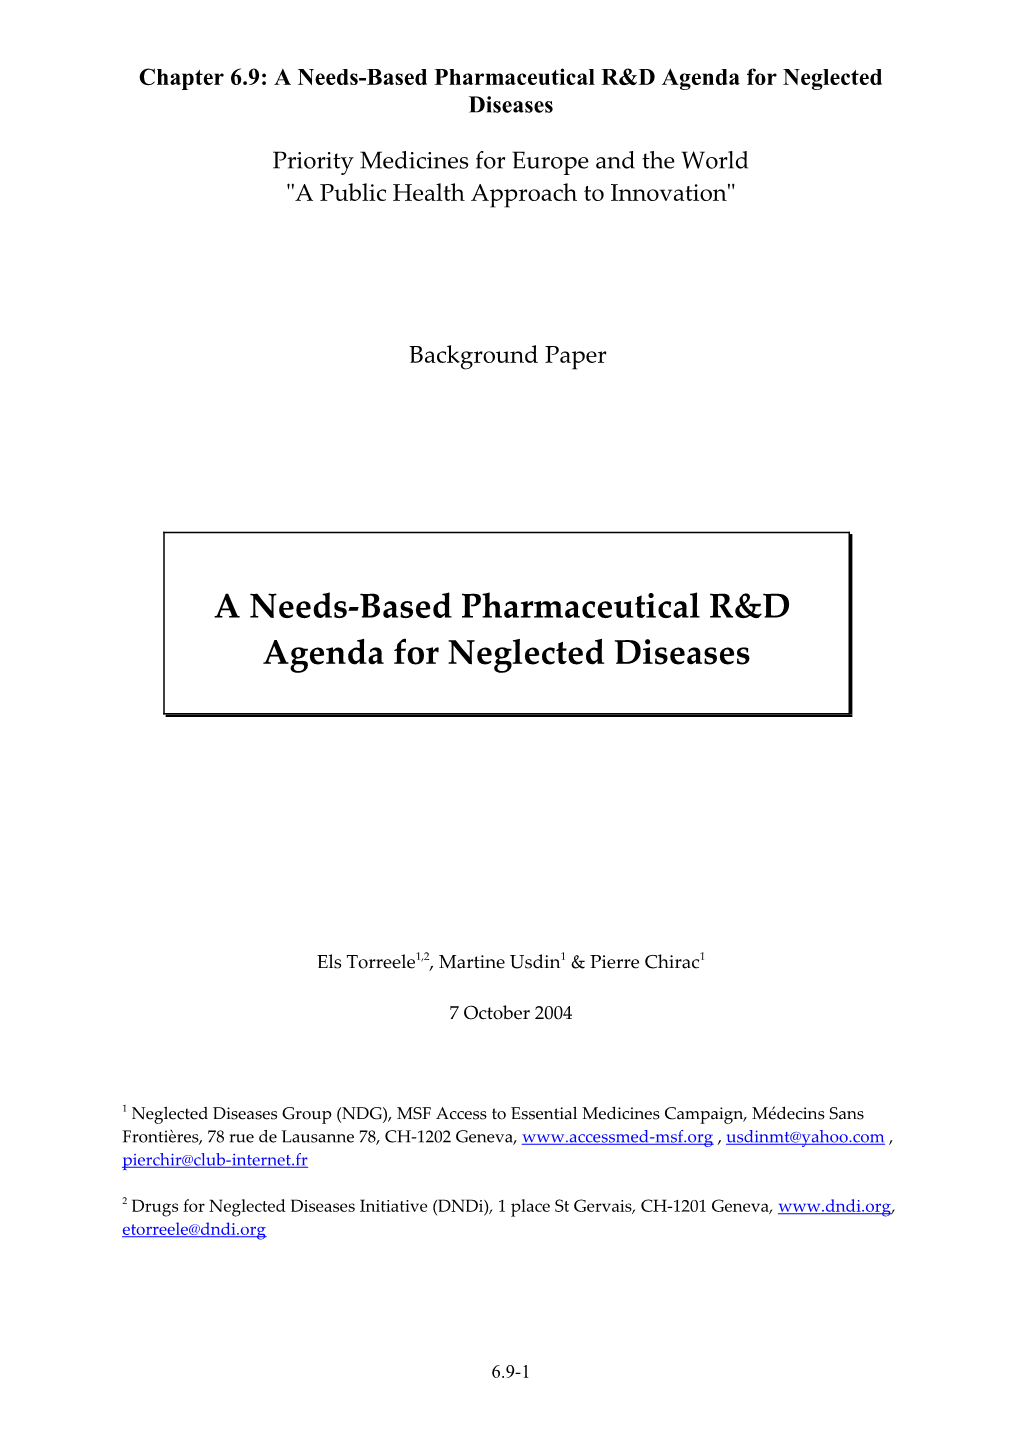 Building a Needs-Driven Pharmaceutical R&D Agenda for Neglected Diseases